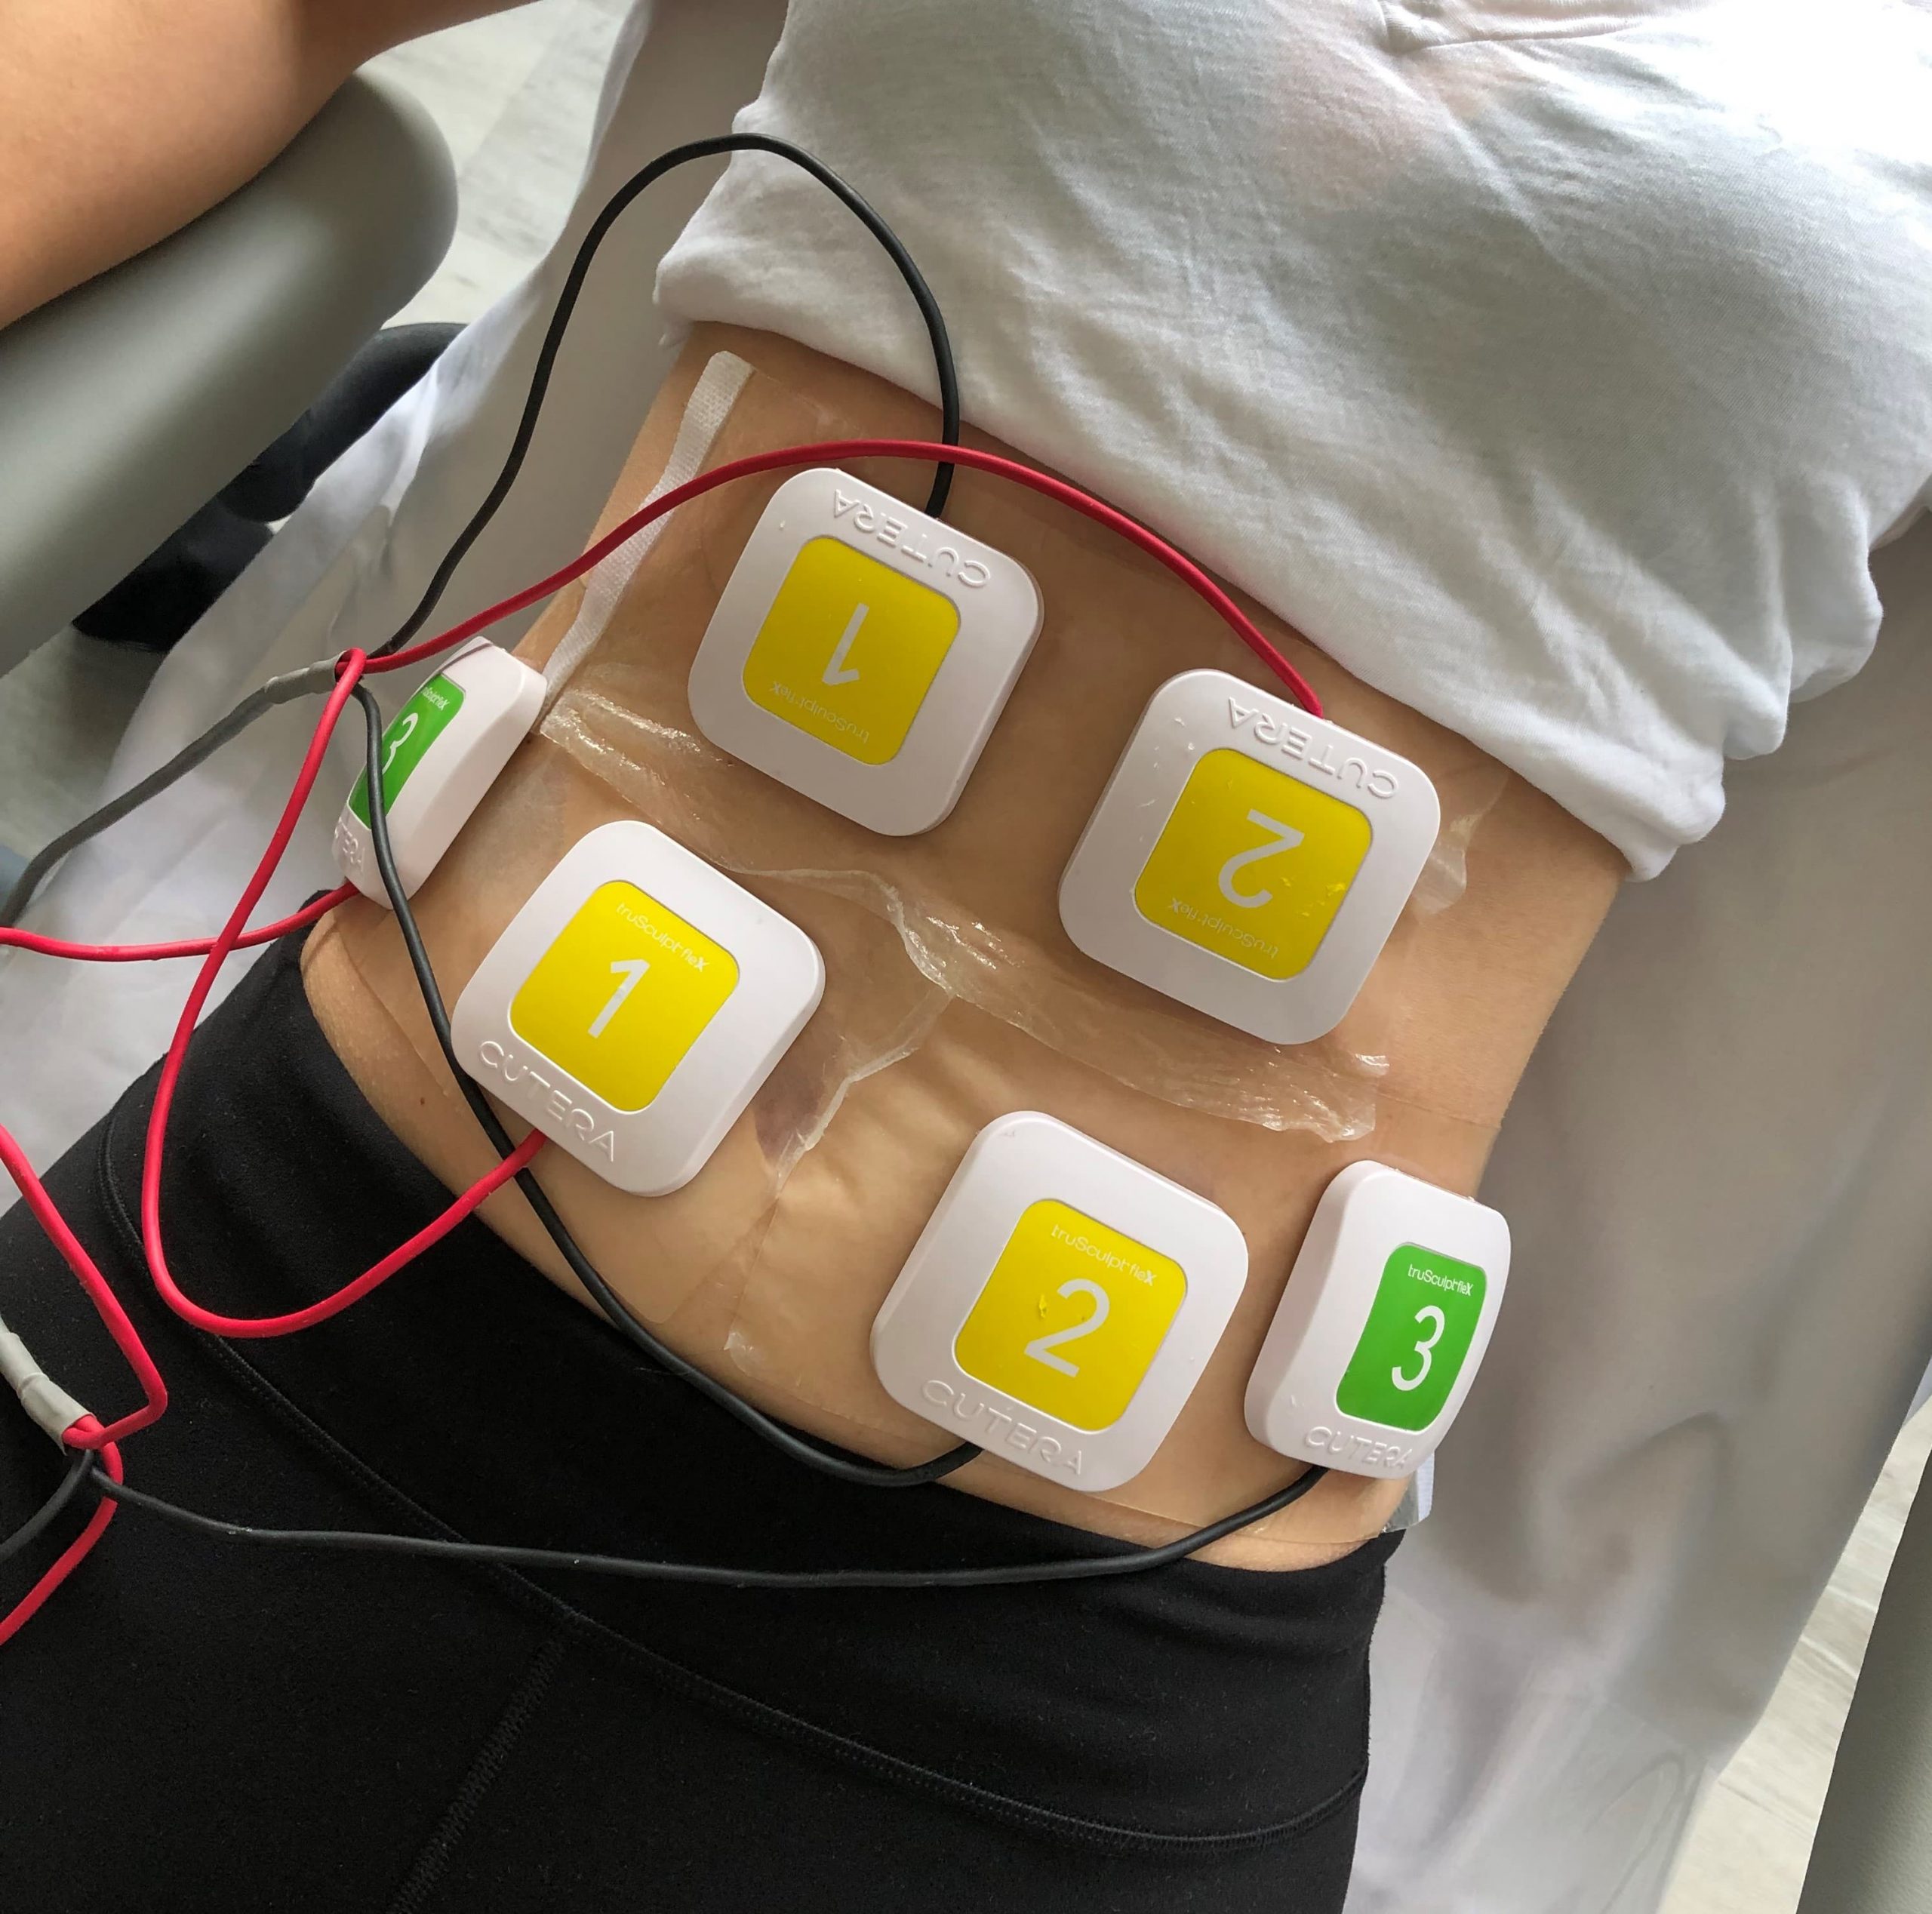 Electrical Muscle Stimulation in Texas